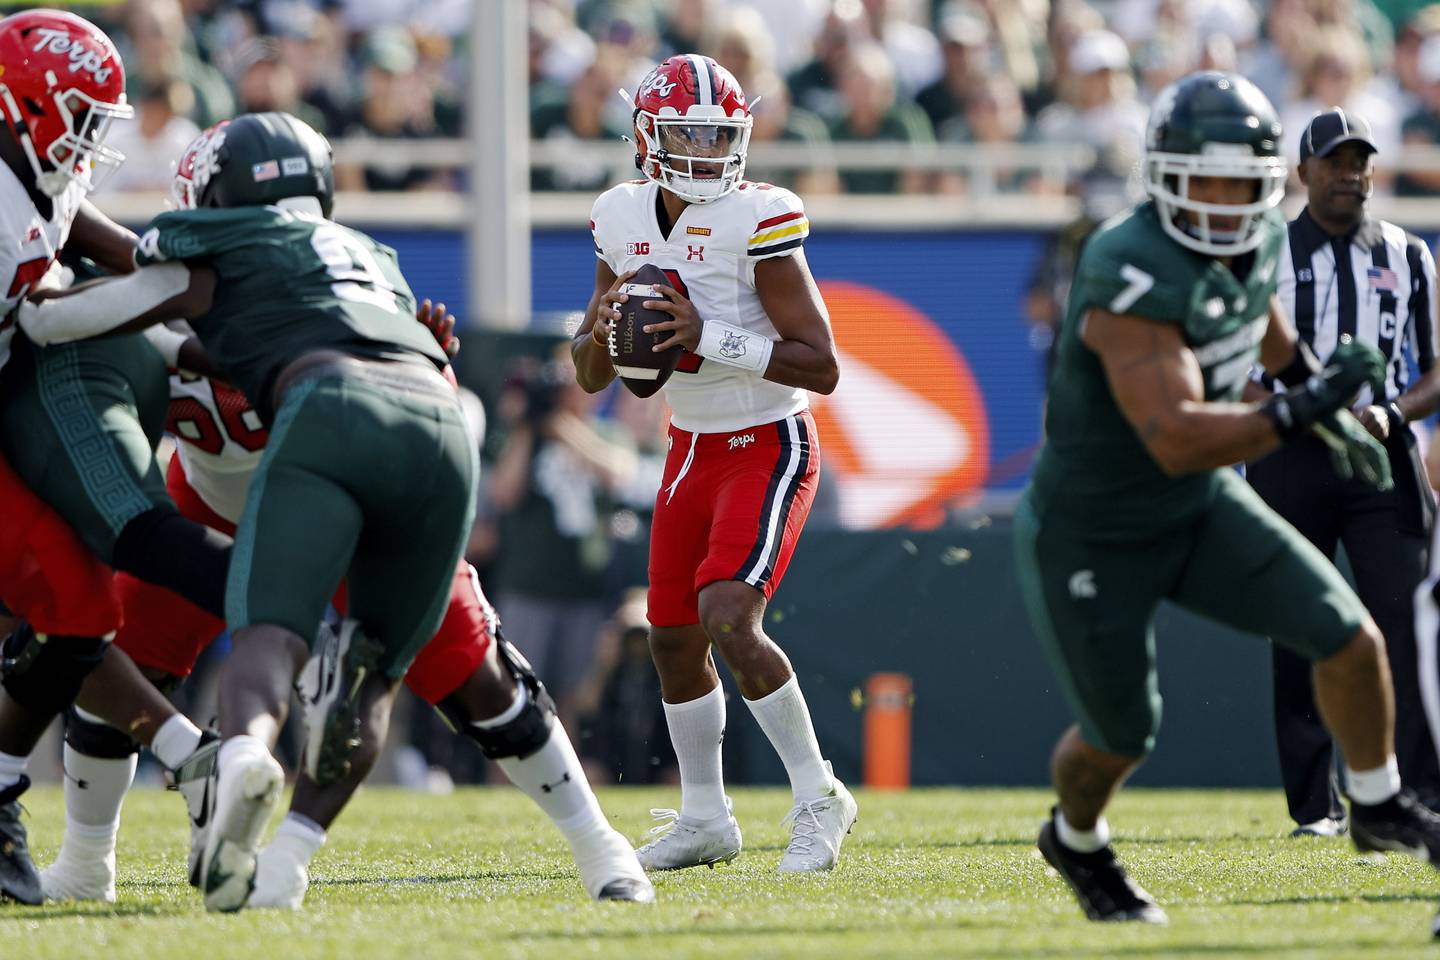 EAST LANSING, MICHIGAN - SEPTEMBER 23: Taulia Tagovailoa, #3 of the Maryland Terrapins, looks to pass in the second quarter of a game against the Michigan State Spartans at Spartan Stadium on Sept. 23, 2023 in East Lansing, Michigan. (Photo by Mike Mulholland/Getty Images)